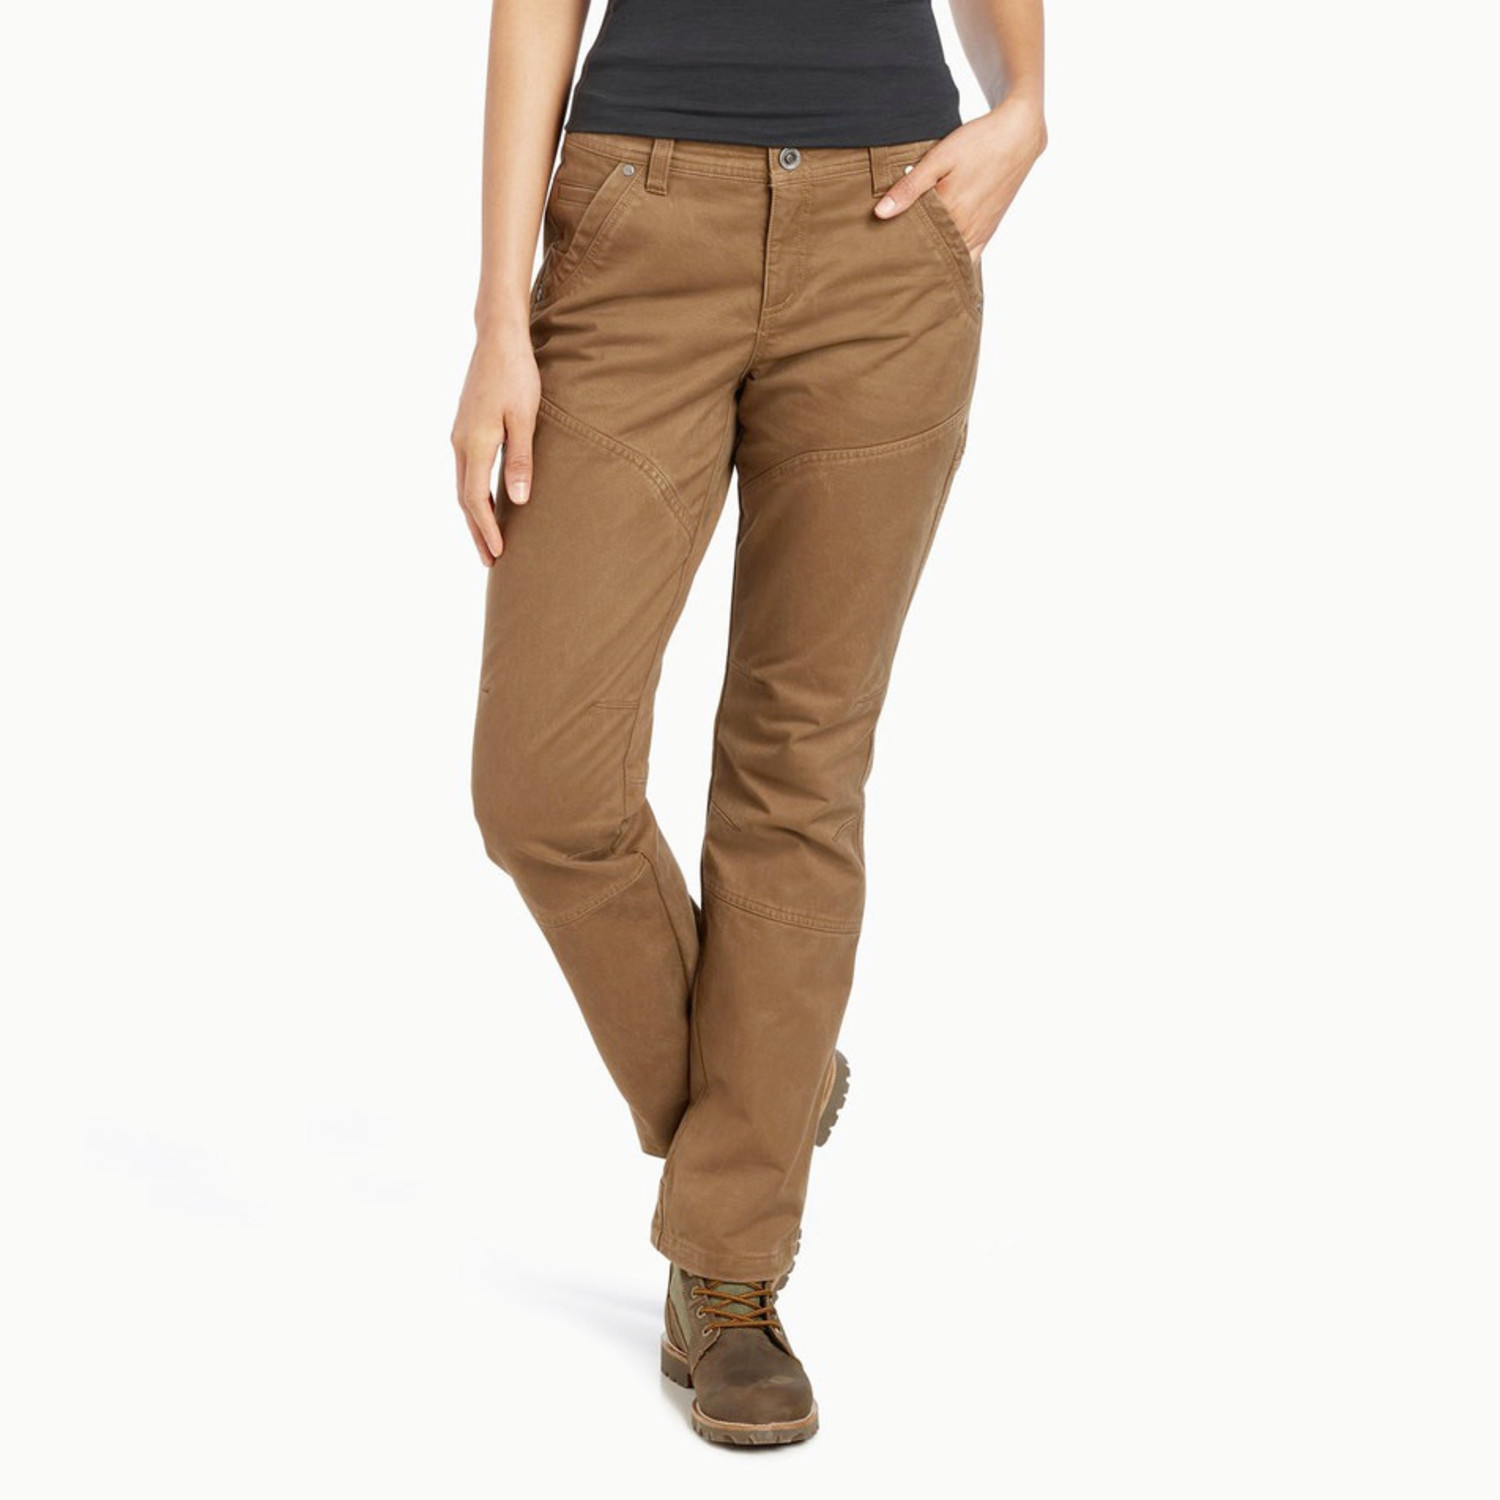 What style name of womens KUHL pants are these? : r/findfashion